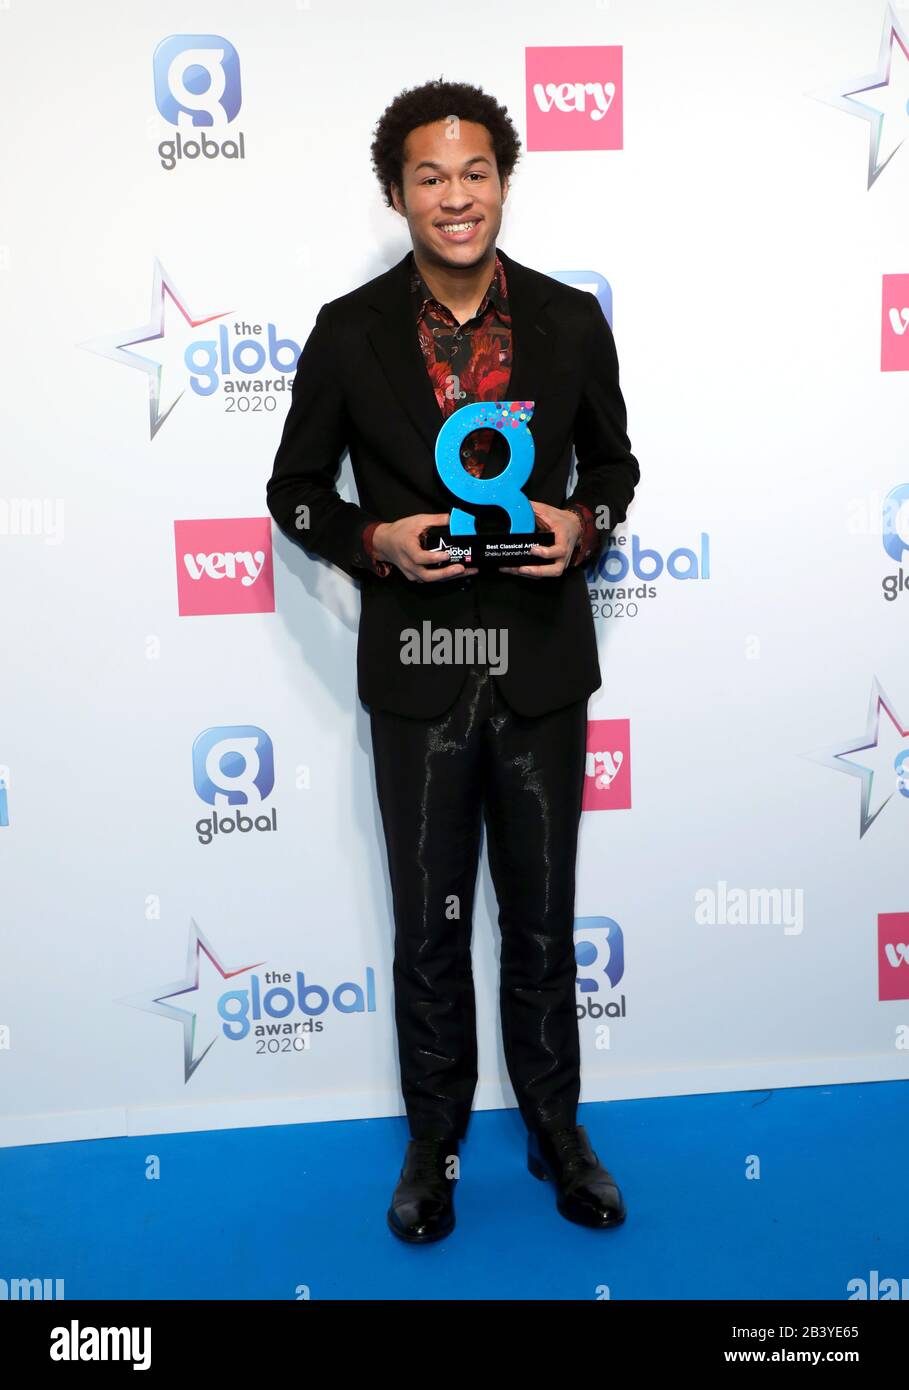 Sheku Kanneh-Mason wins Best Classical Artist at The Global Awards 2020 with Very.co.uk at London's Eventim Apollo Hammersmith. Stock Photo